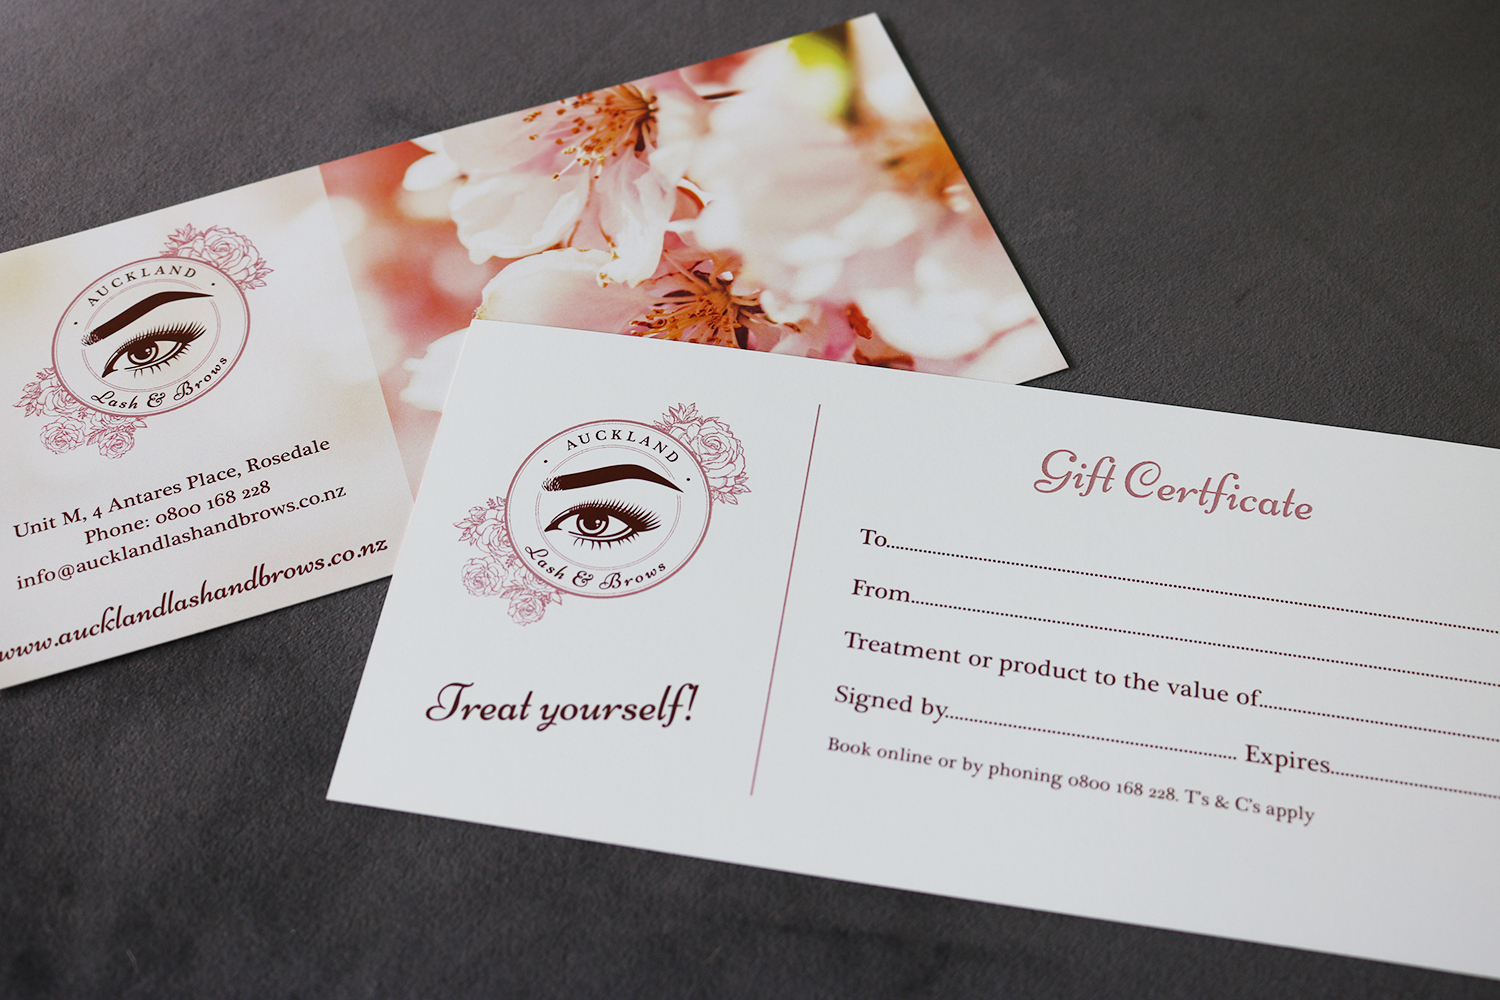 Auckland Lash & Brows Gift Certificates